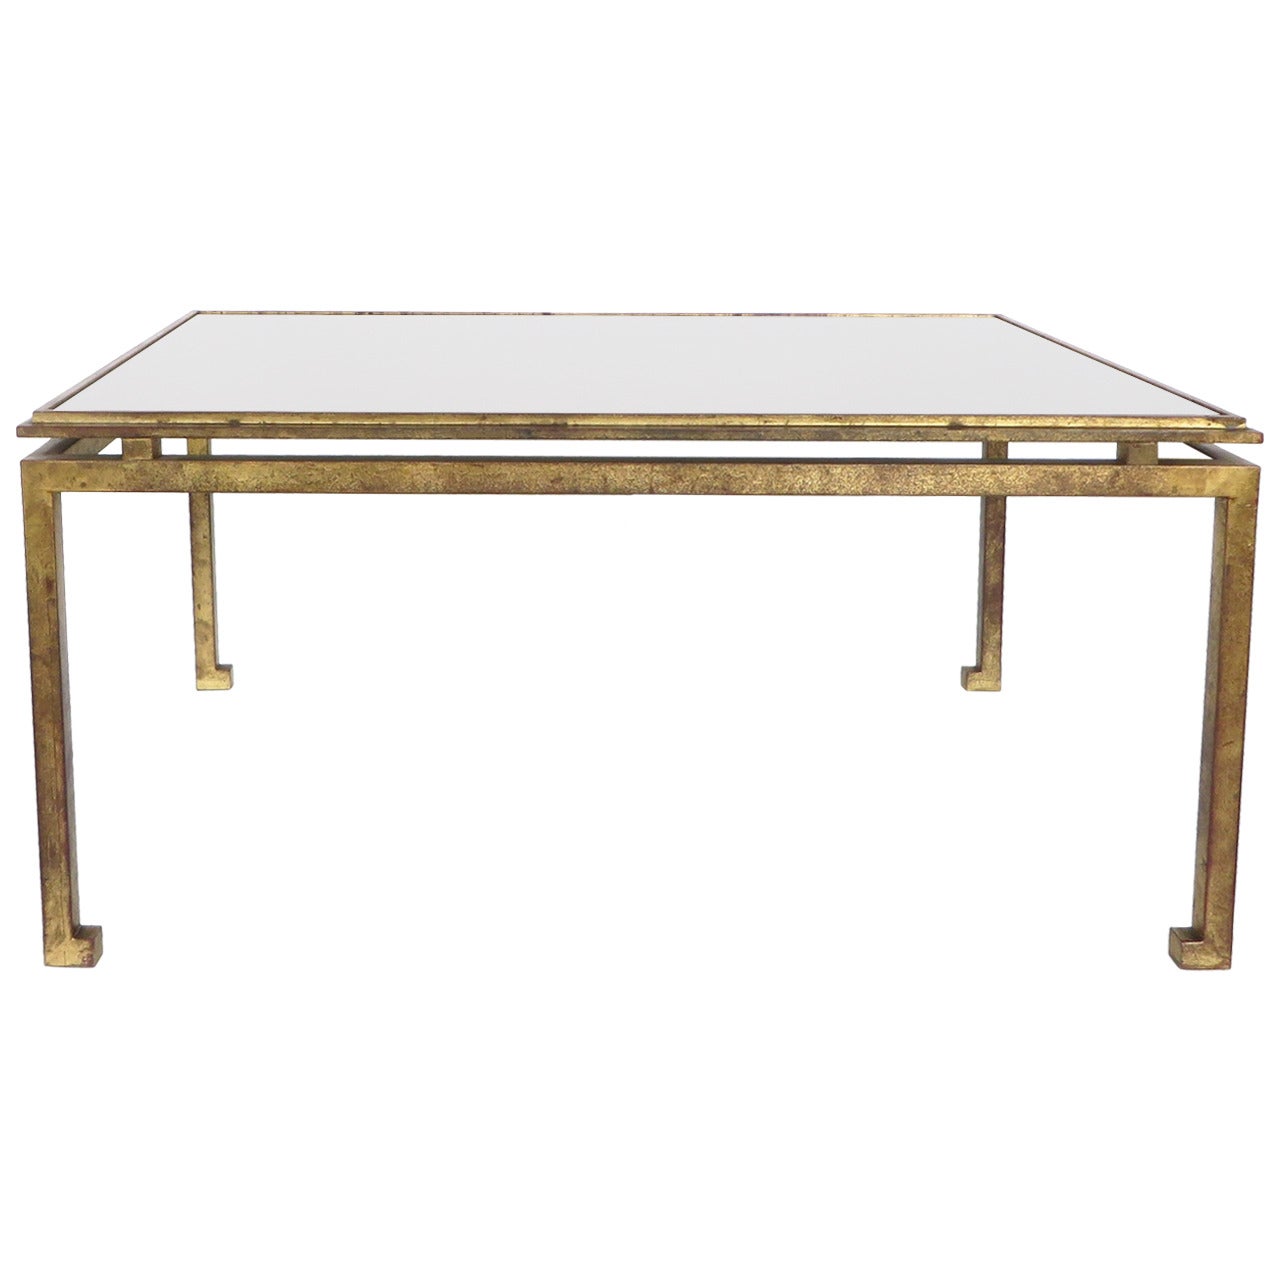 Maison Ramsay French Patina Gold Leaf Wrought Iron Coffee Table